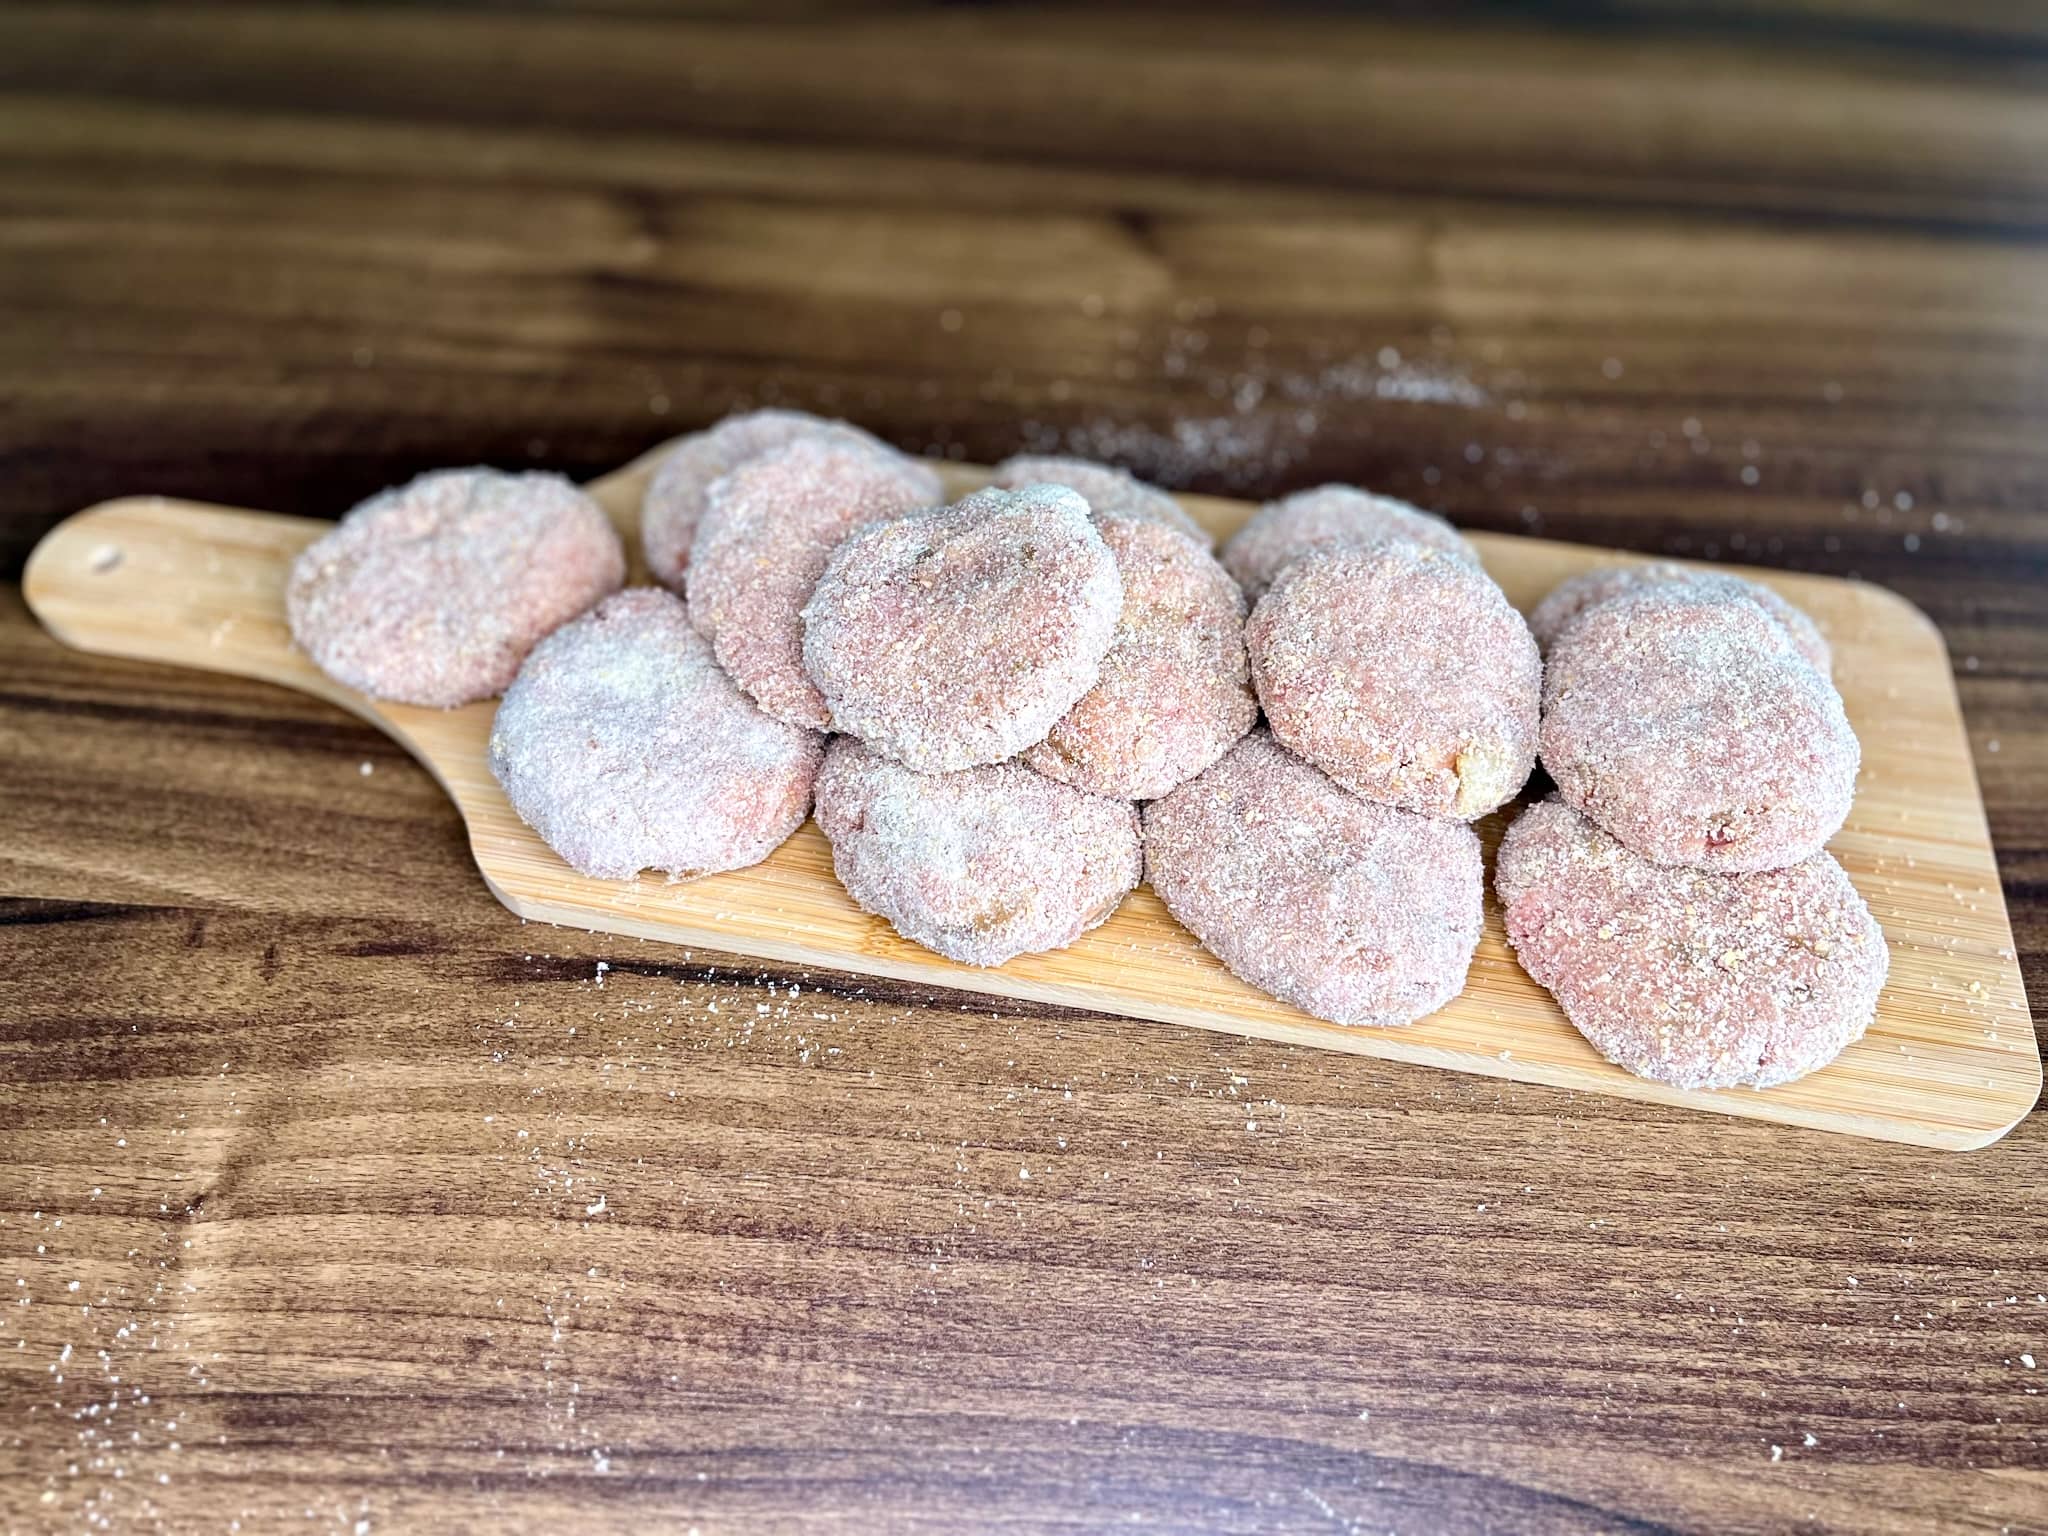 Formed Meat Patties on a chopping board before frying